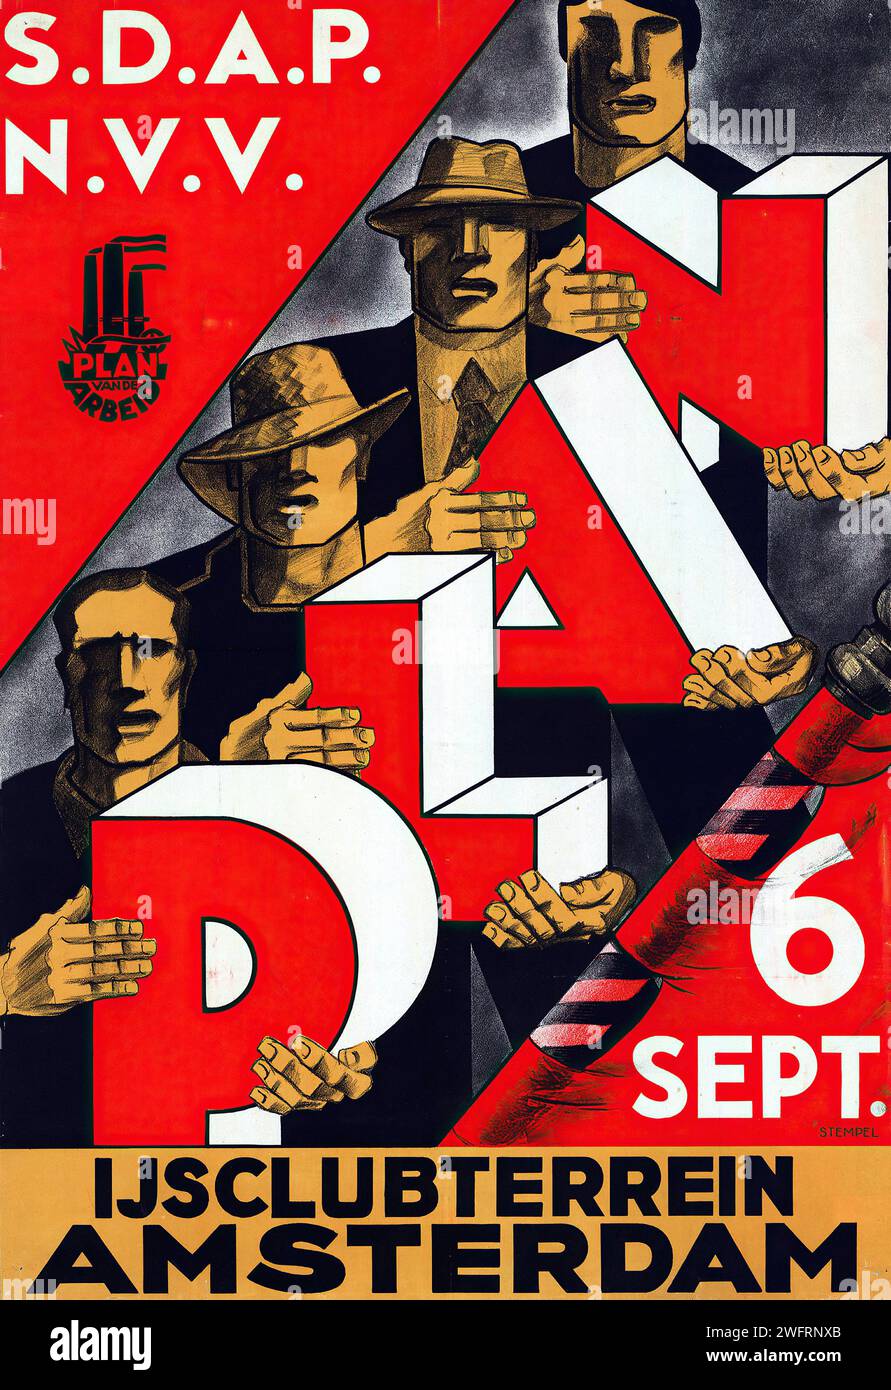 'S.D.A.P. N.V.V. PLAN VAN DE ARBEID' and '6 SEPT. IJSCLUBTERREIN AMSTERDAM' which translates to 'S.D.A.P. N.V.V. LABOR PLAN' and 'SEPTEMBER 6, ICE CLUB TERRAIN AMSTERDAM.' Vintage Dutch Advertising poster depicting figures with the letters S.D.A.P. and N.V.V., in a dynamic red, black, and white composition. The style has elements of socialist realism. Stock Photo